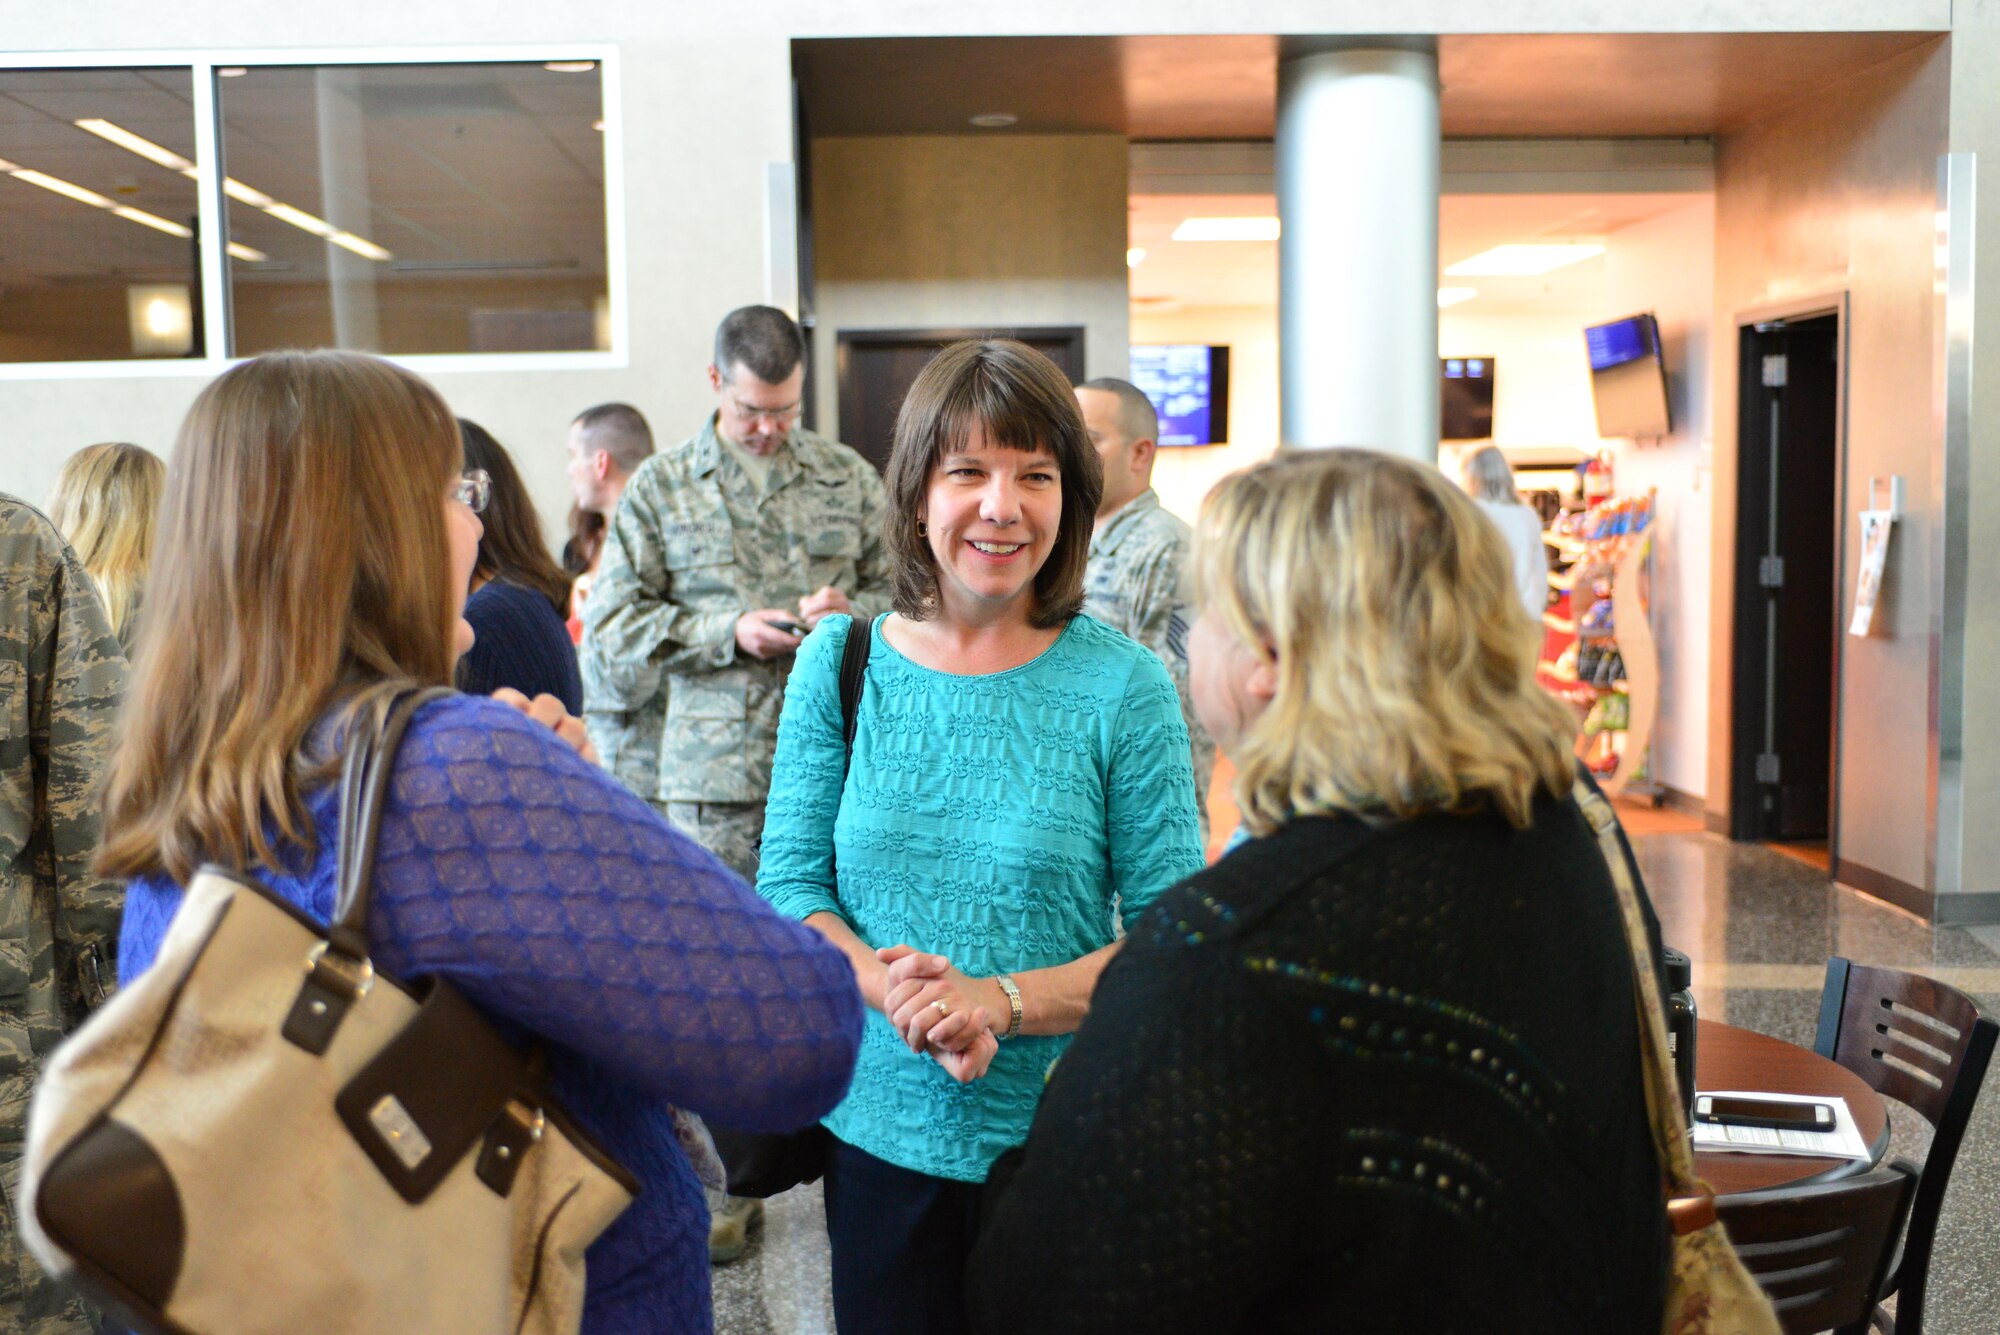 Leanne Norvell, spouse of Maj. Michael Norvell, director of operations with the 2nd Weather Group, Detachment 1, speaks to other spouses in the 557th Weather Wing at Offutt Air Force Base, Neb., during the Spouses Town Hall Nov. 1, 2016. The town hall, which included briefings on the Key Spouses program, a meet and greet with wing leadership and a tour of the 557th WW facilities, gave spouses a greater understanding of the 557th WW mission. (U.S. Air Force photo/Senior Airman Rachel Hammes)